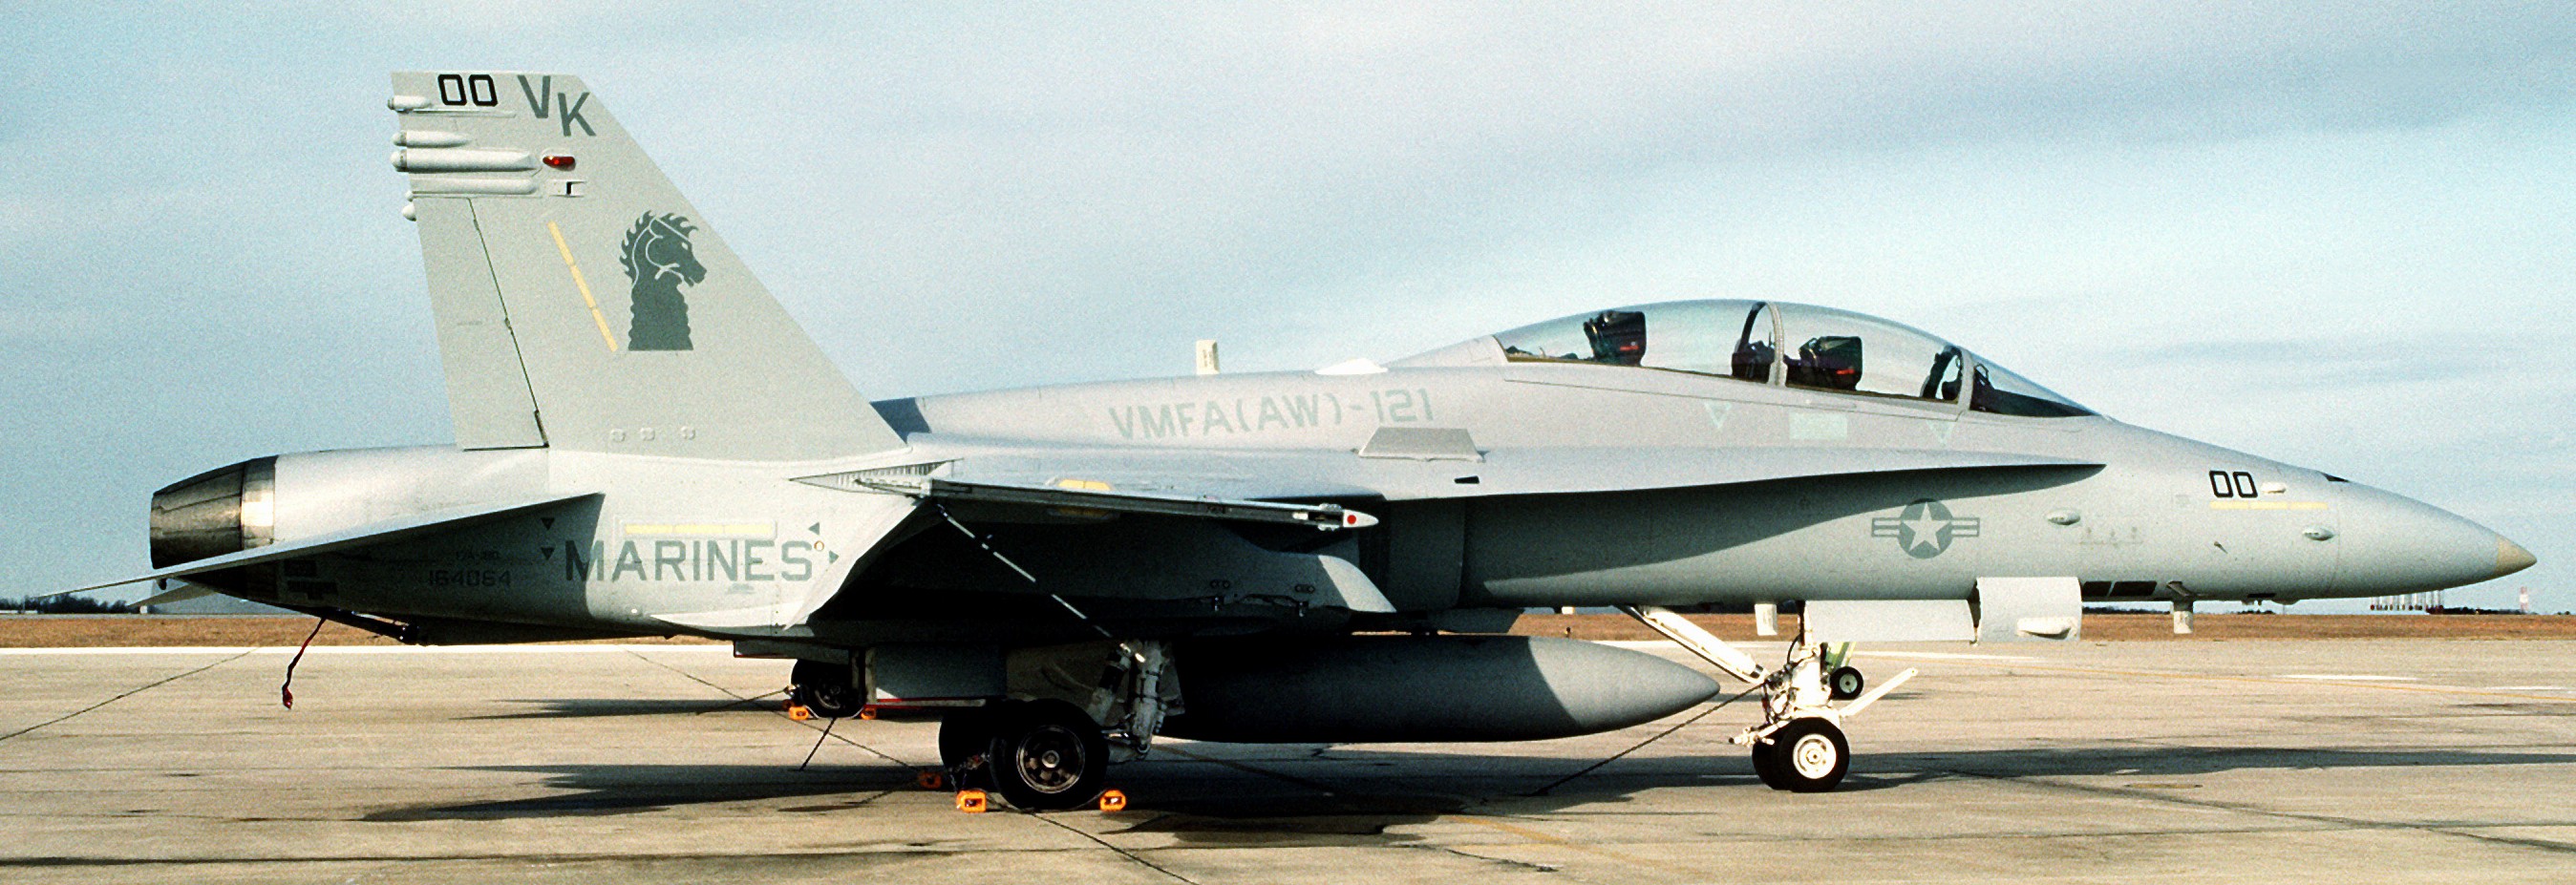 vmfa(aw)-121 green knights marine fighter attack squadron f/a-18d hornet 17